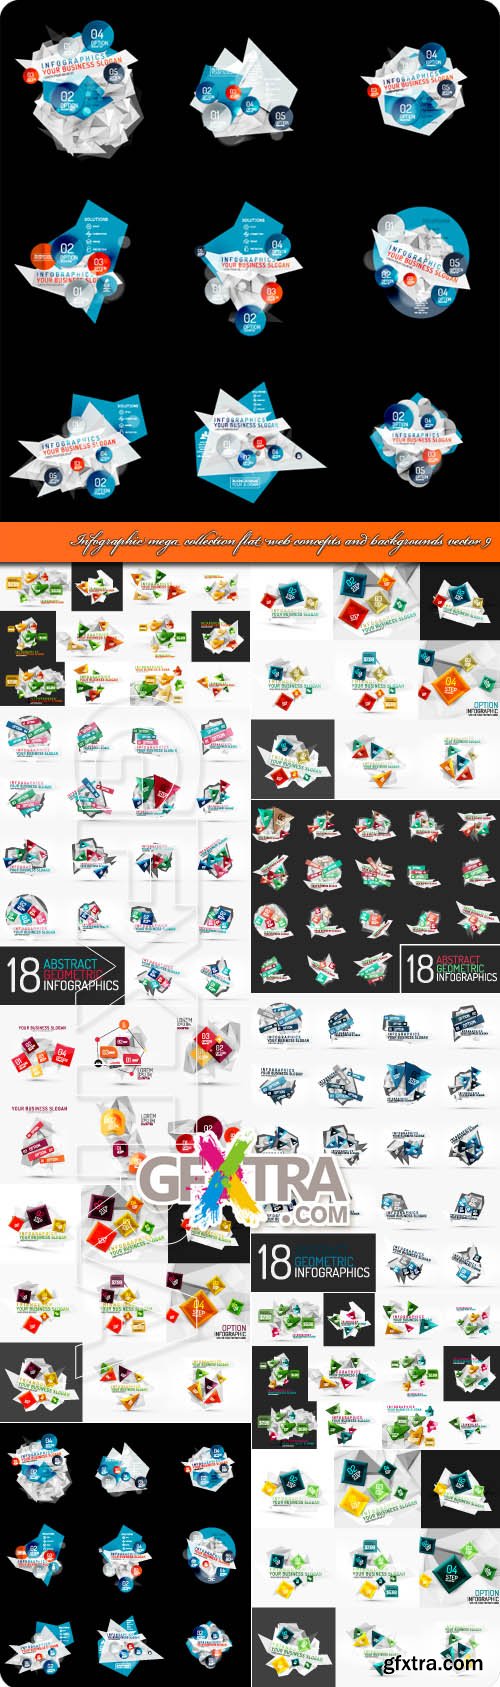 Infographic mega collection flat web concepts and backgrounds vector 9